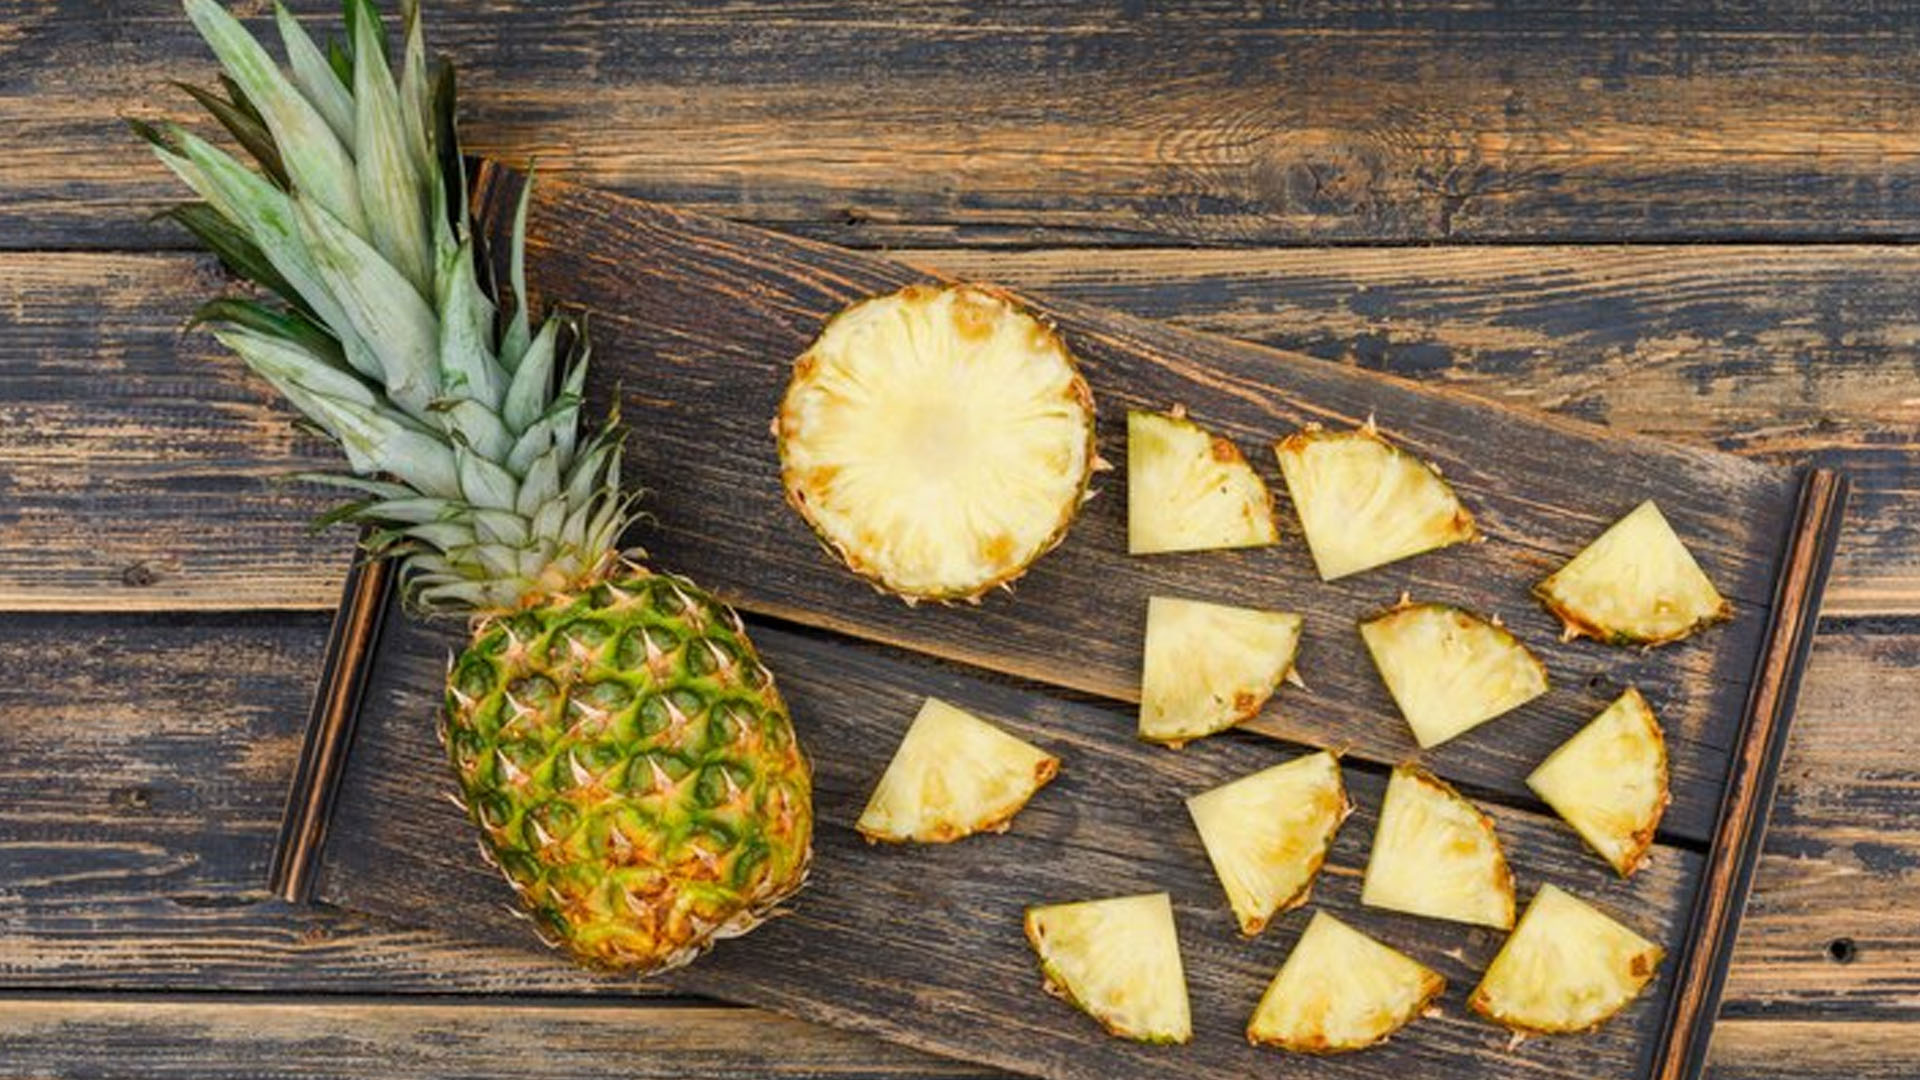 What Are Health Benefits Of Pineapple Fruit?